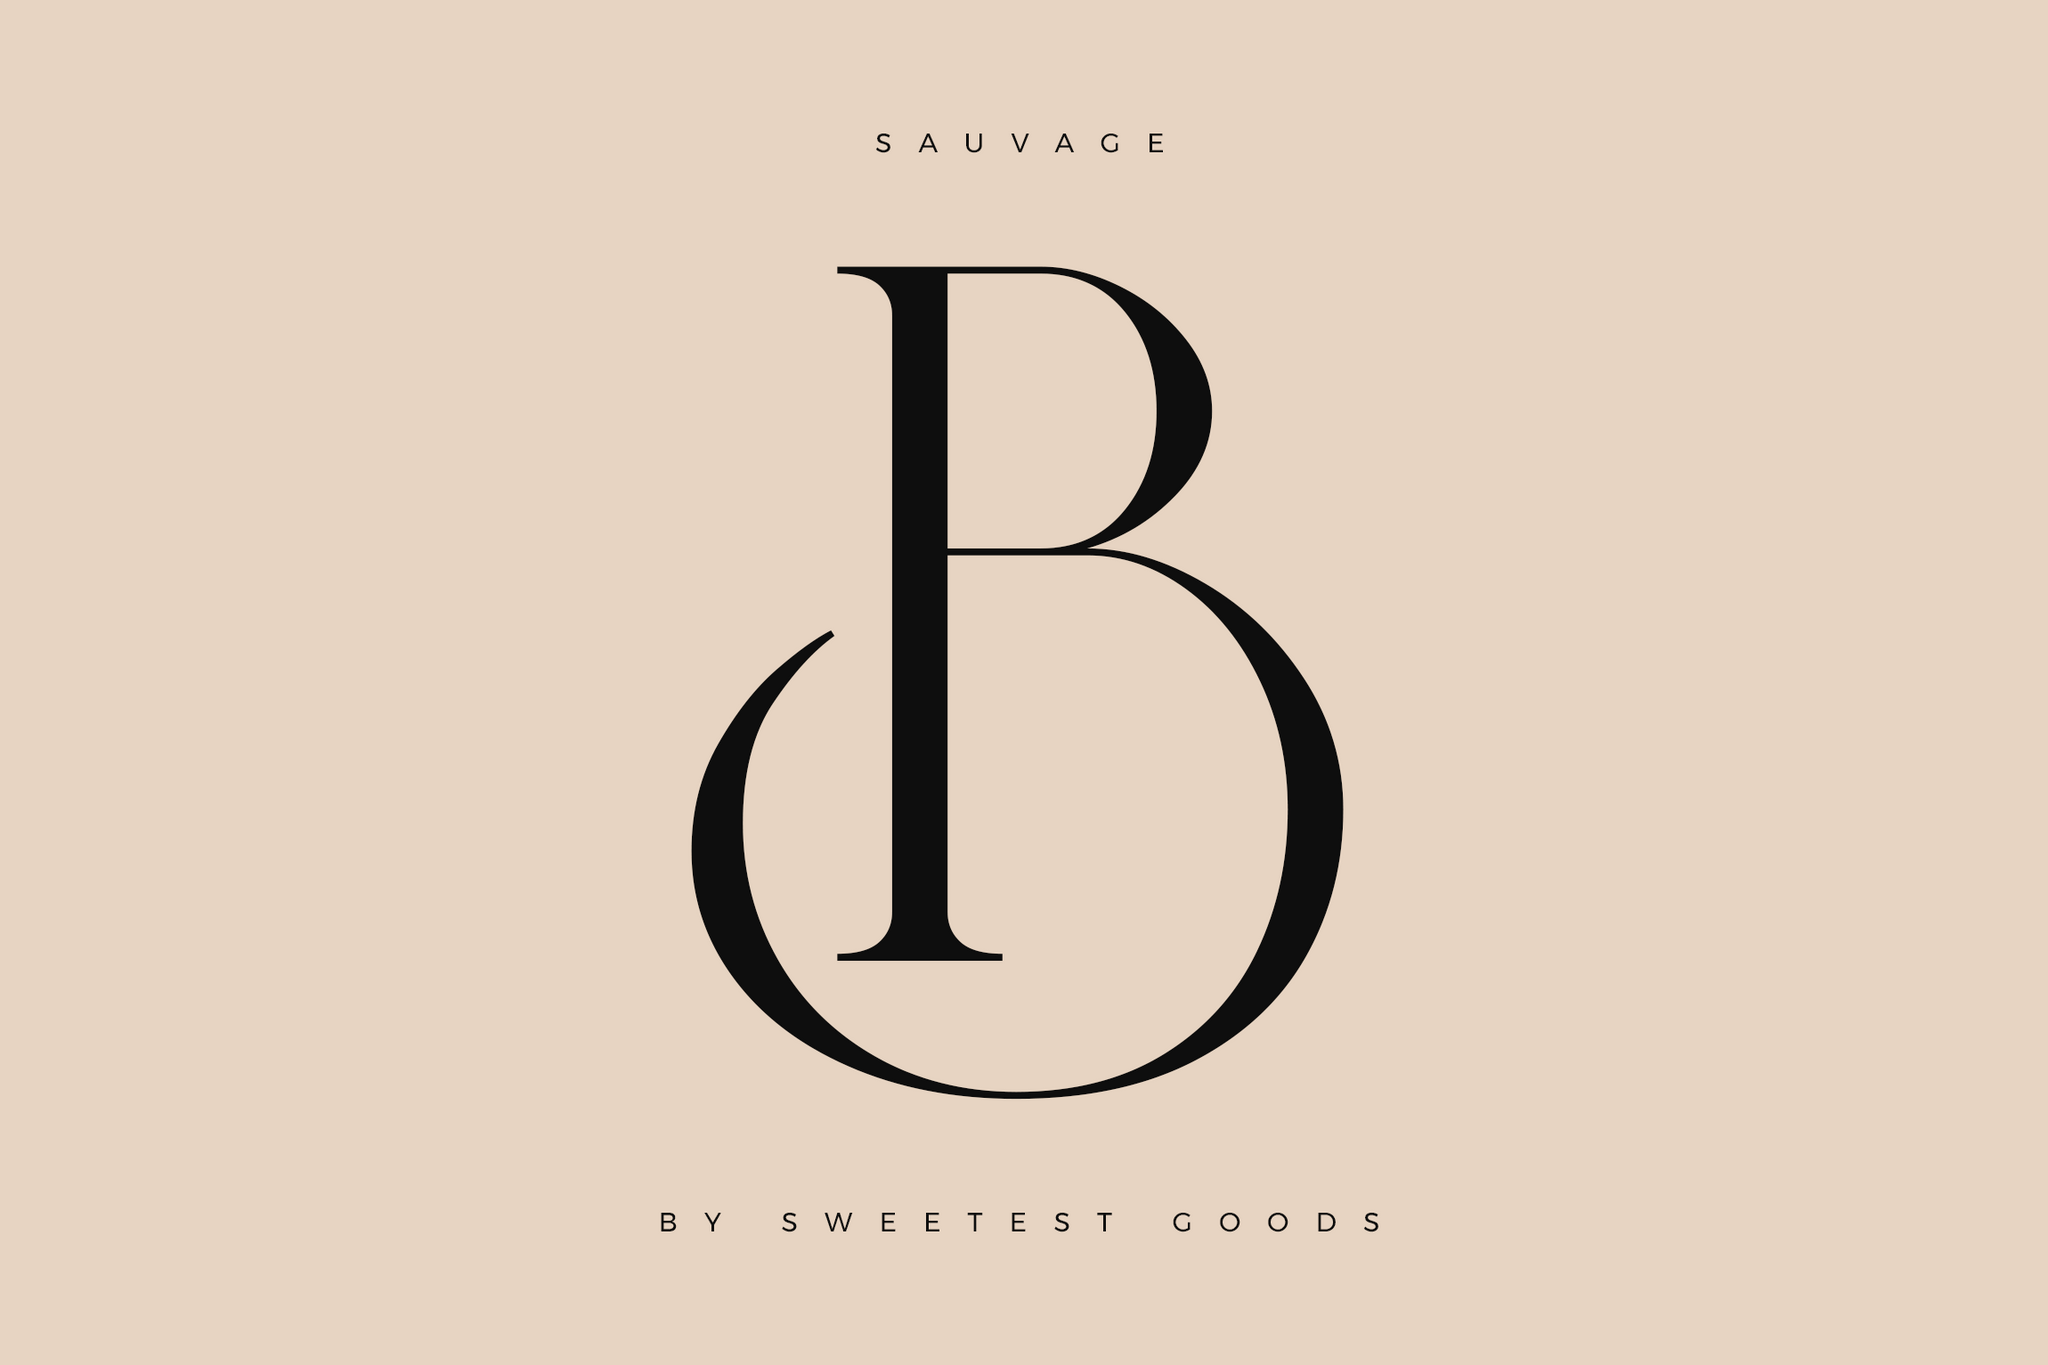 Letter Design with swash "B" - Sauvage Art-Deco Inspired Font